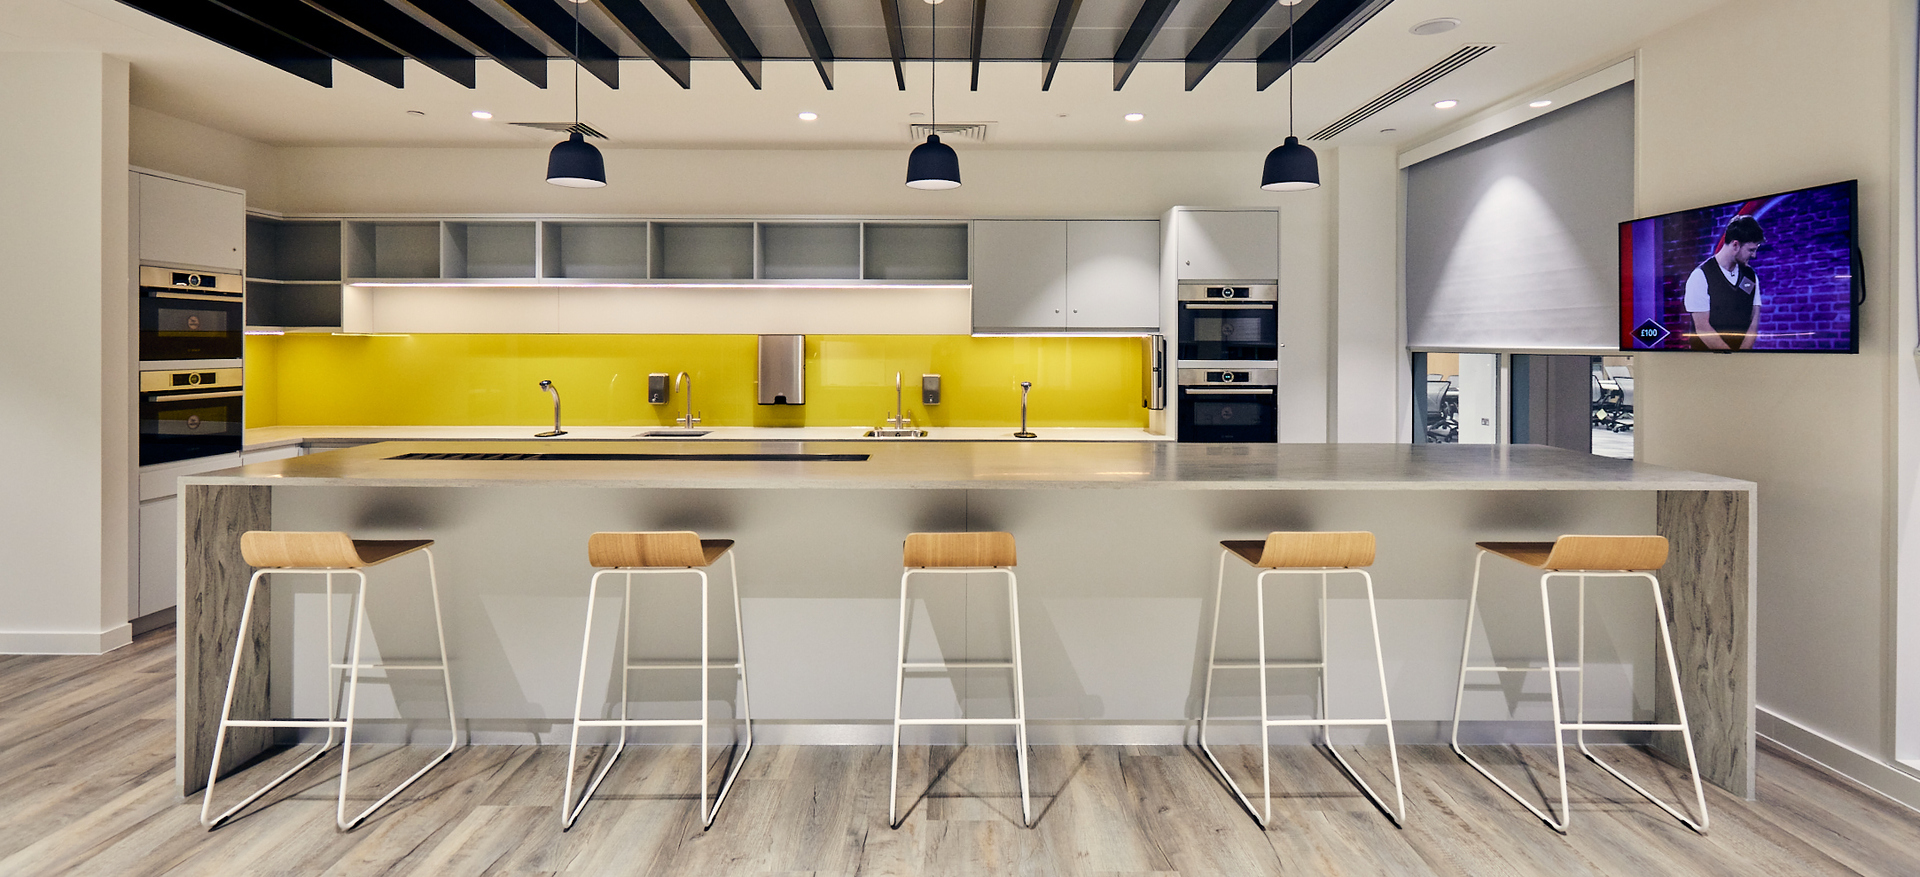 Breakfast bar and kitchen in corporate office fit out by ISG Ltd